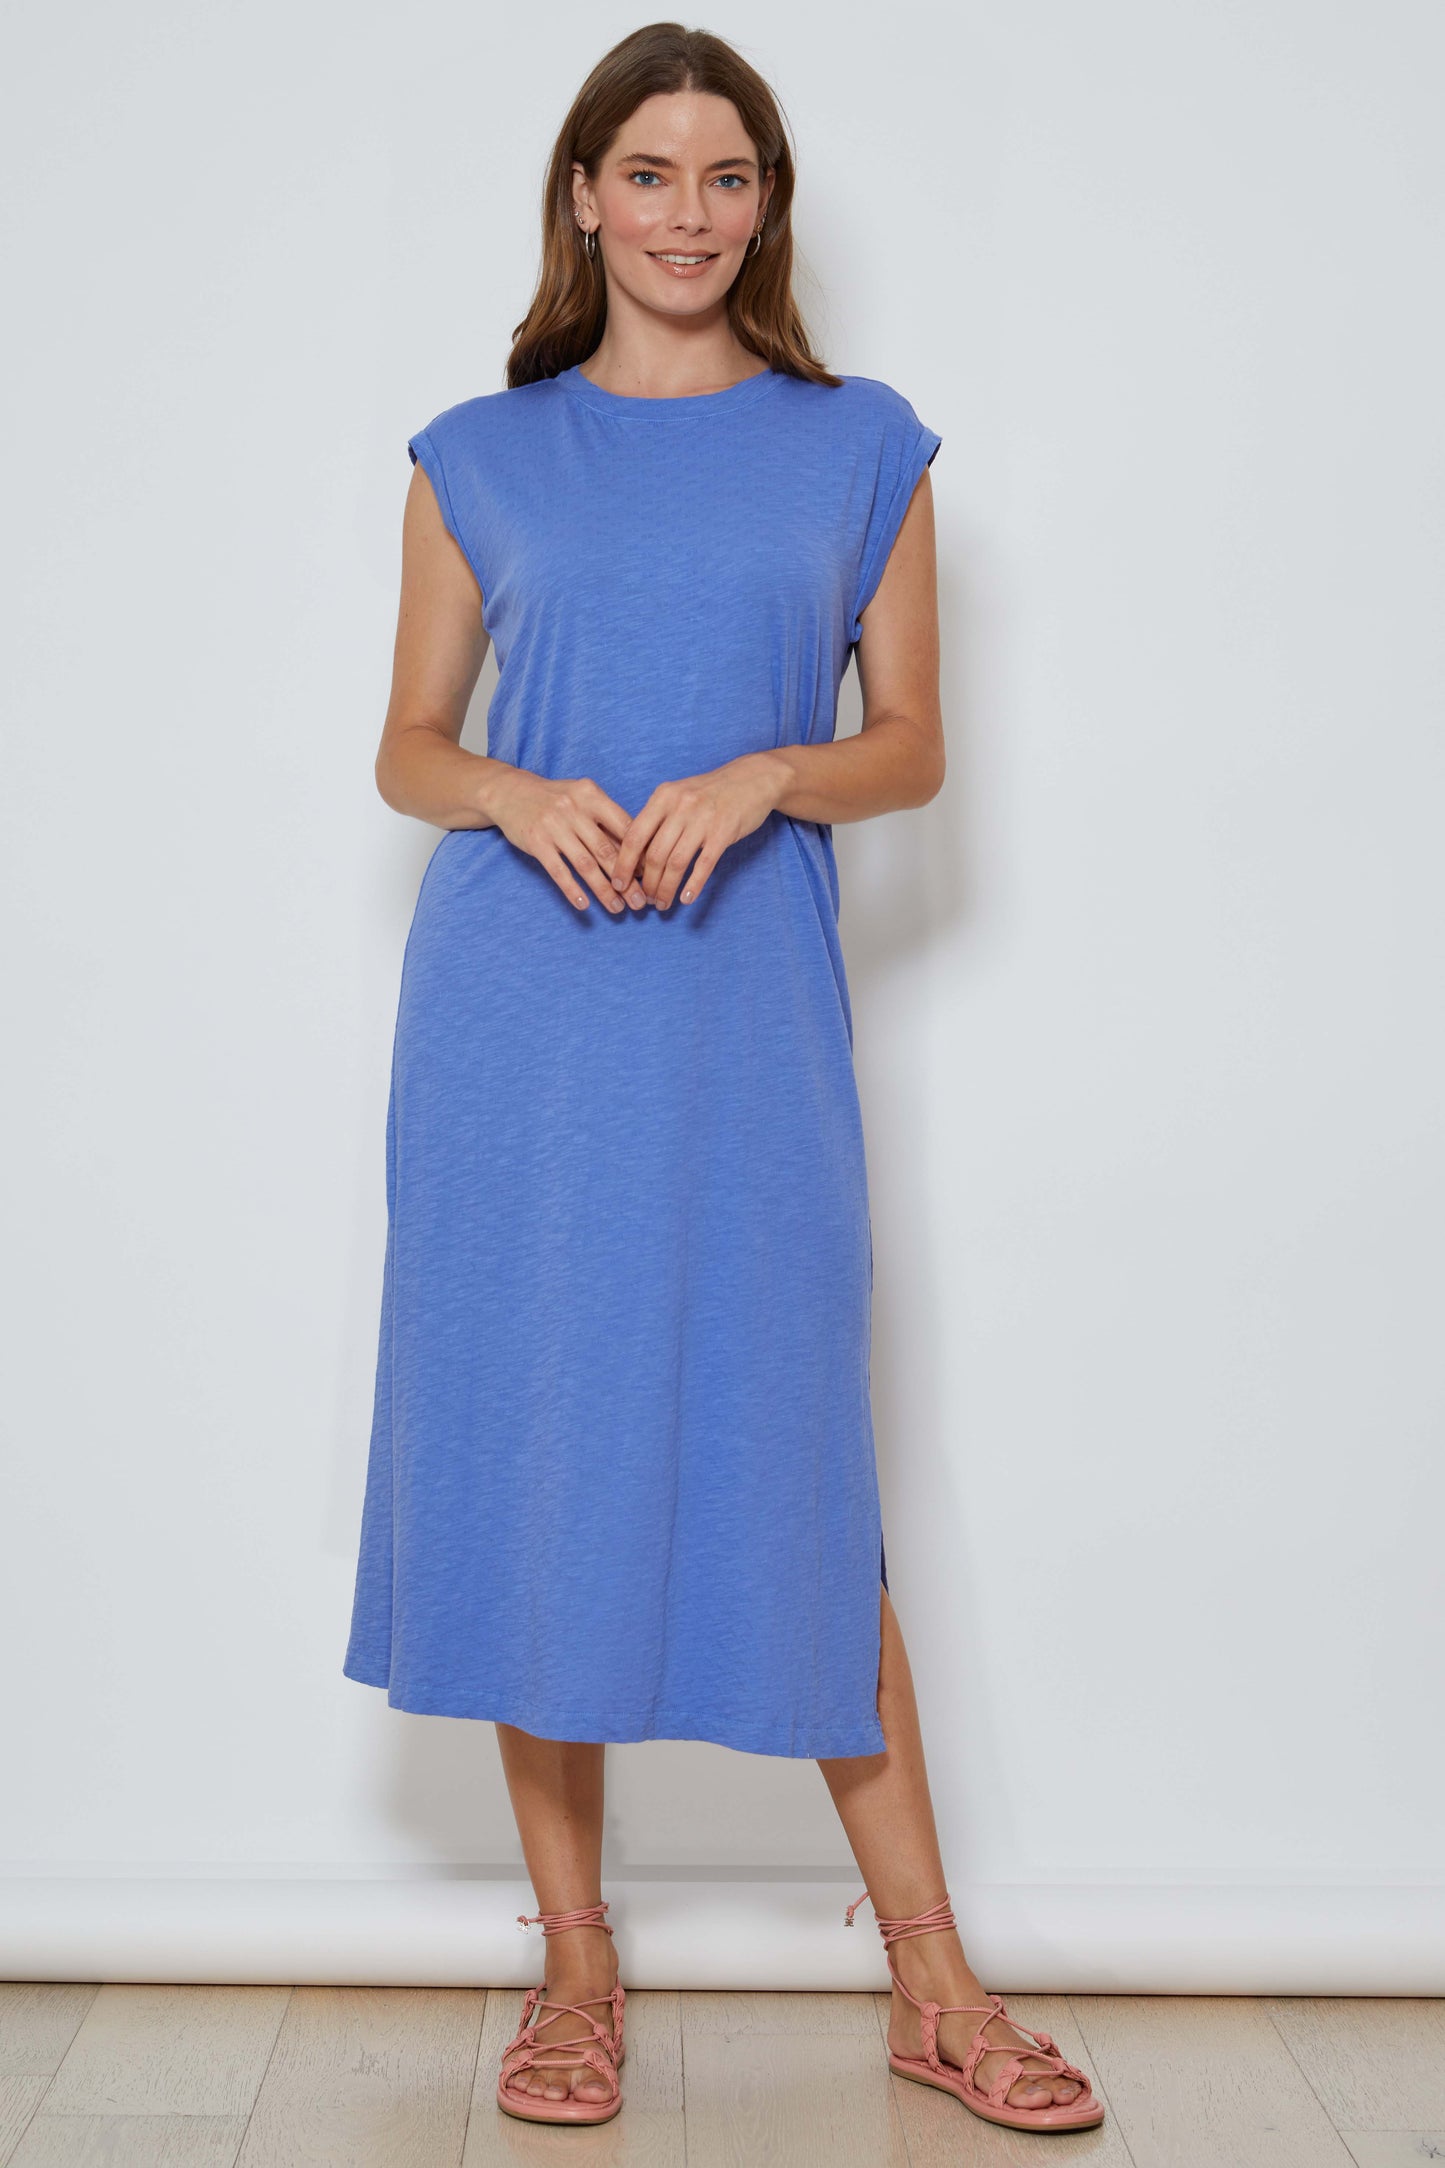 Cap Sleeve Column Dress with Side Slits in blue pea by Mododoc